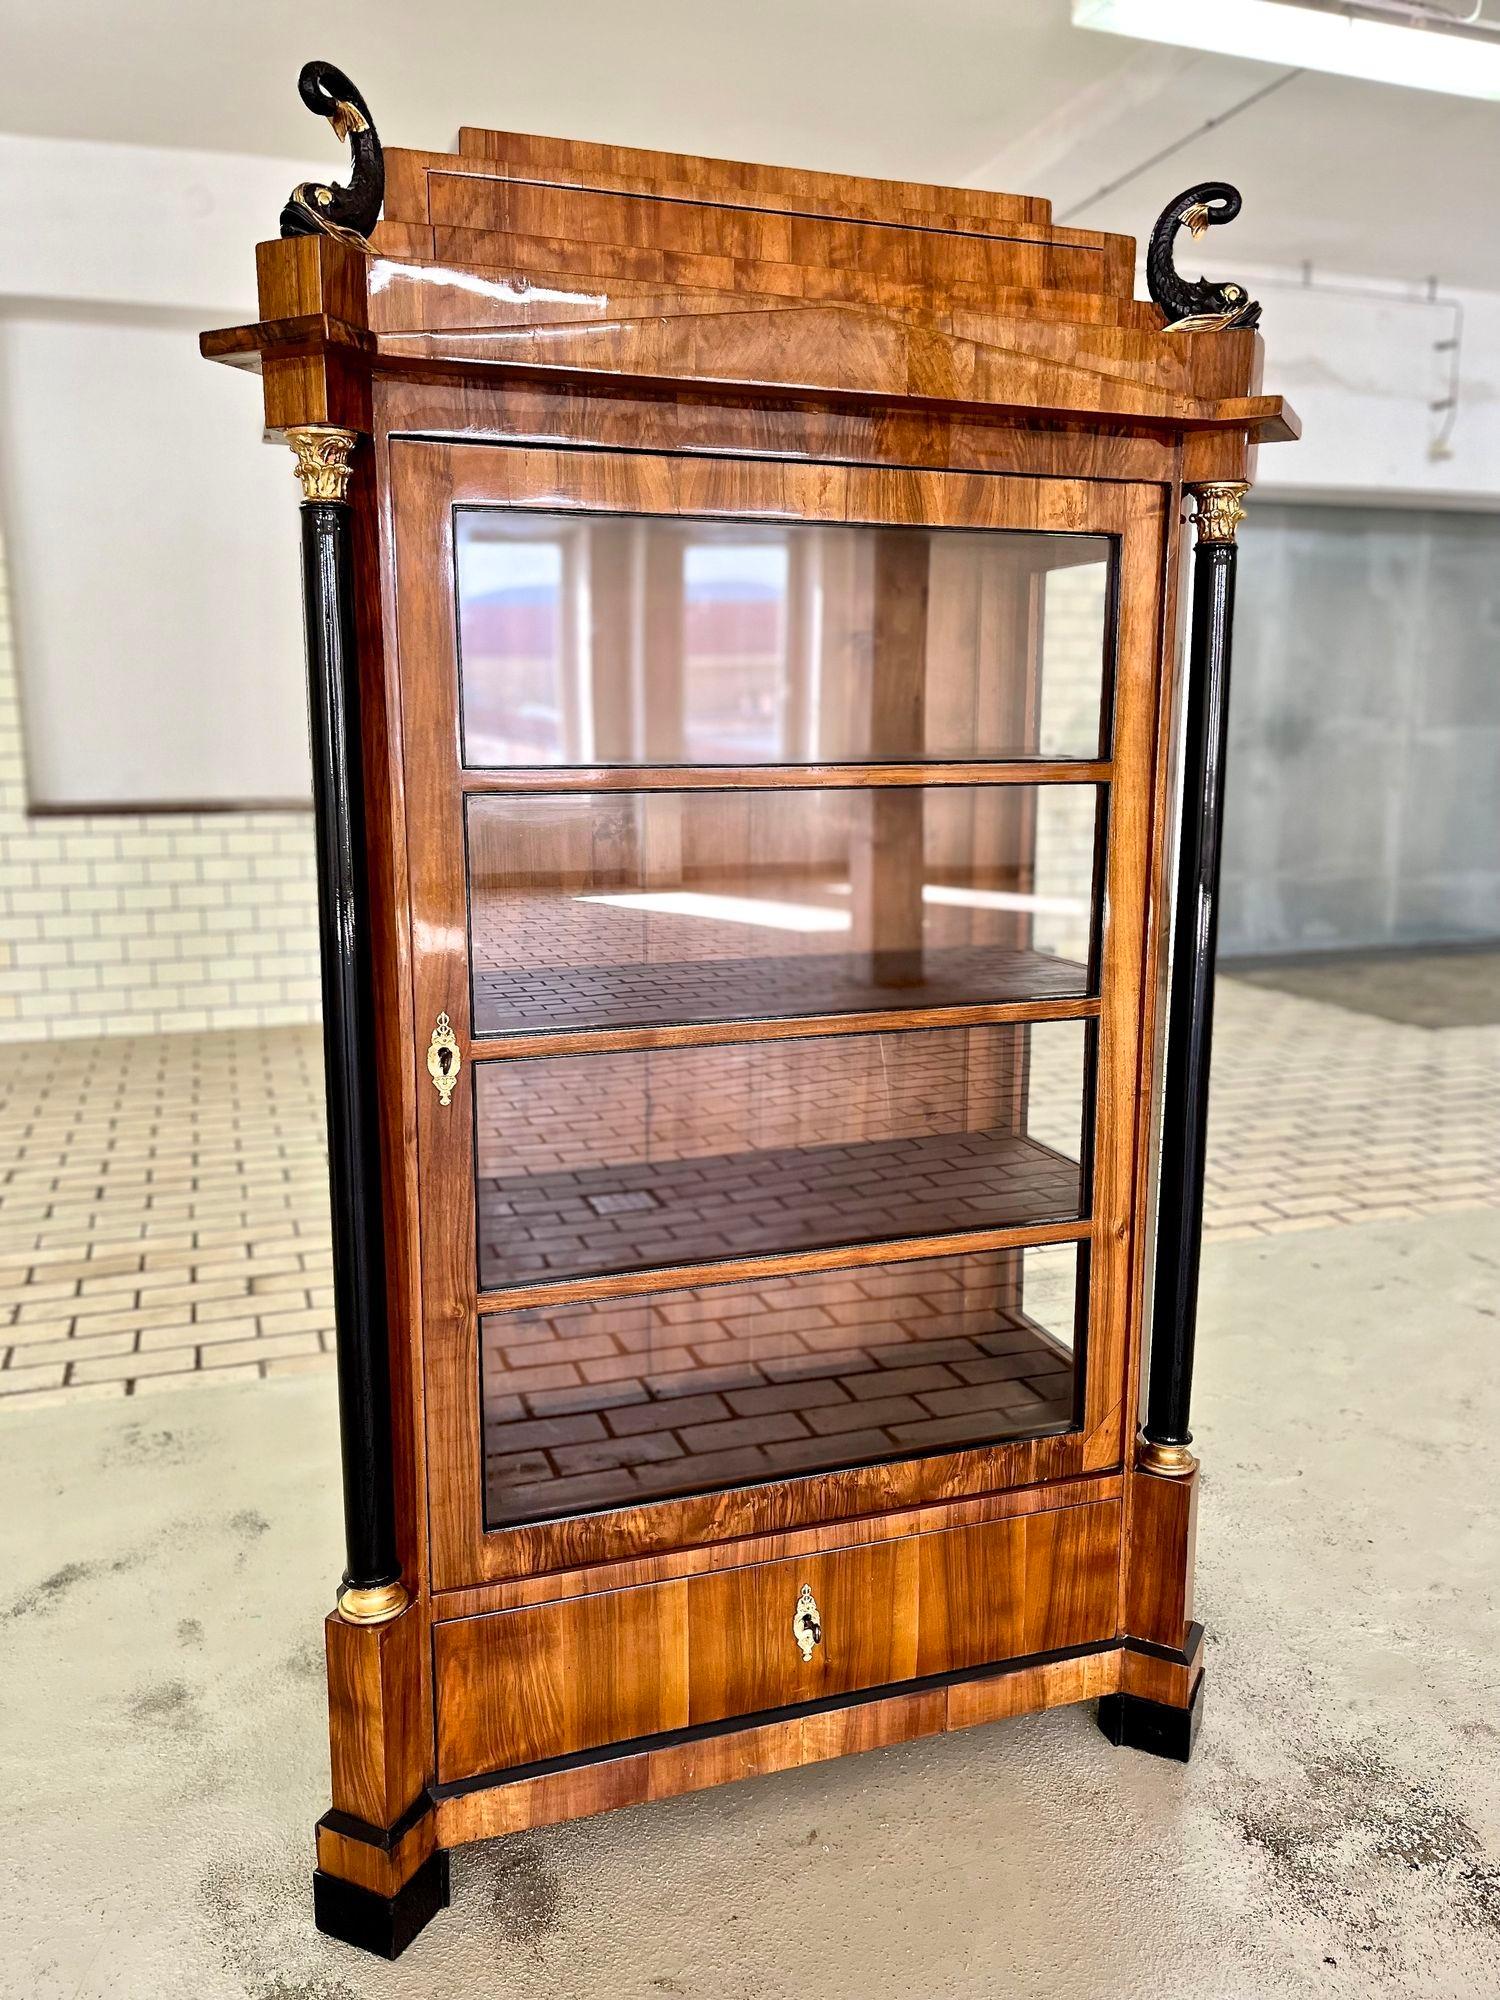 Exceptional, rare empire nutwood display cabinet or vitrine from the mid 19th century in North Germany - the 